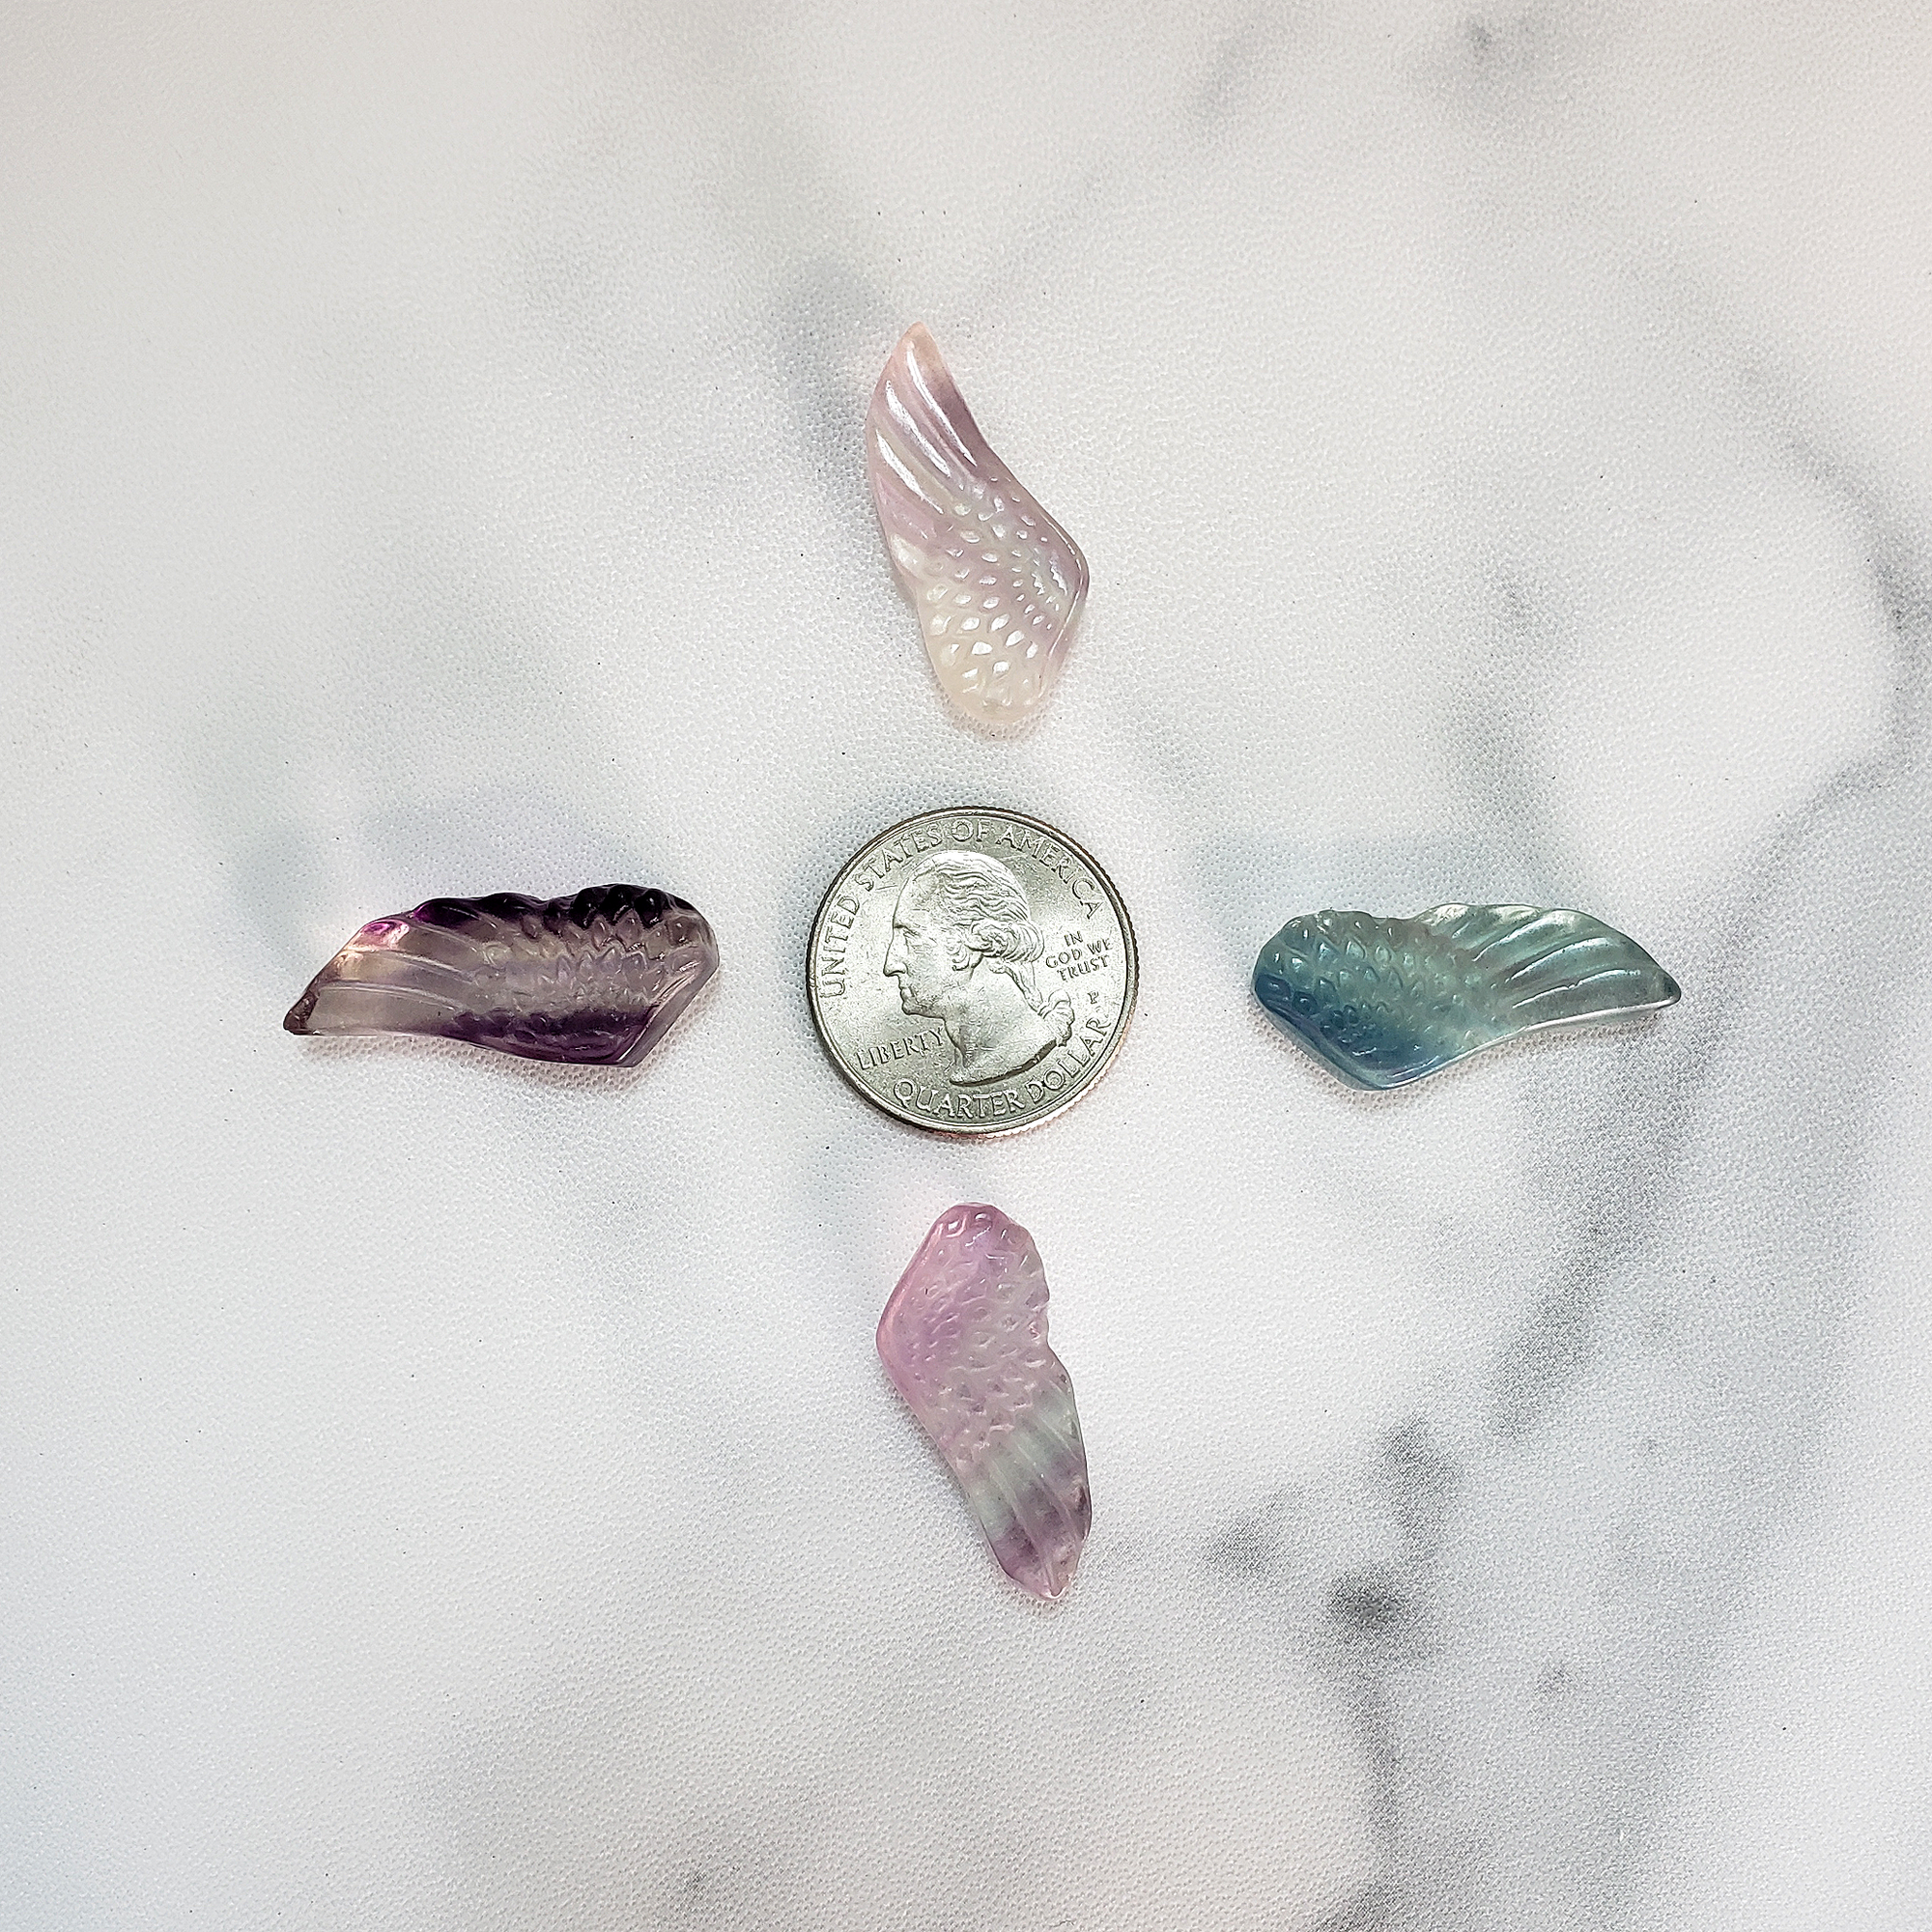 Fluorite Crystal Natural Gemstone Angel Wing Mini Carving - Size Comparison